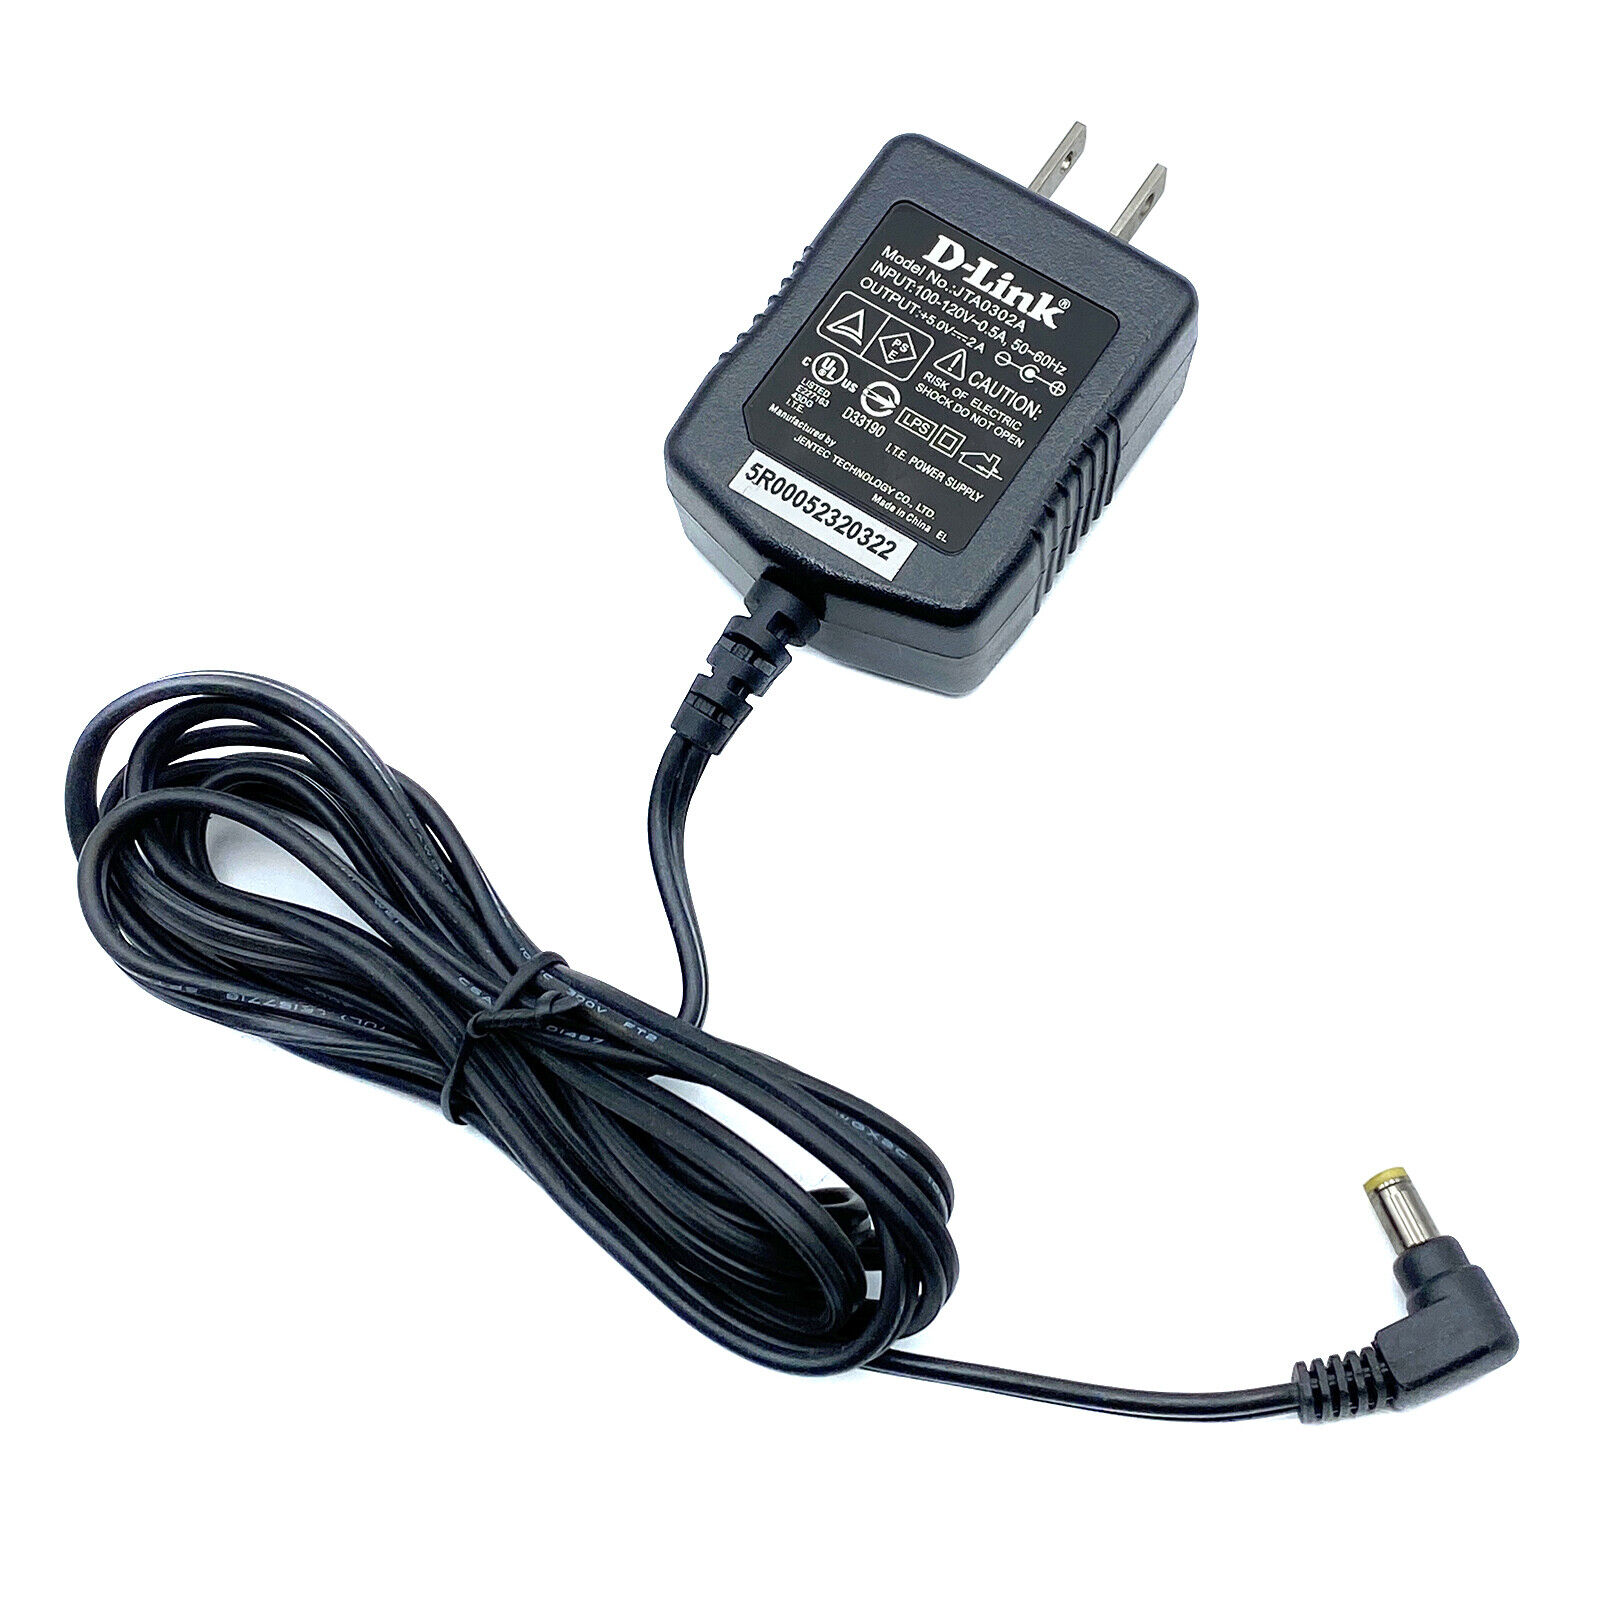 *Brand NEW*5V 2A AC/DC Adapter Genuine D-Link JTA0302A Wall Power Supply